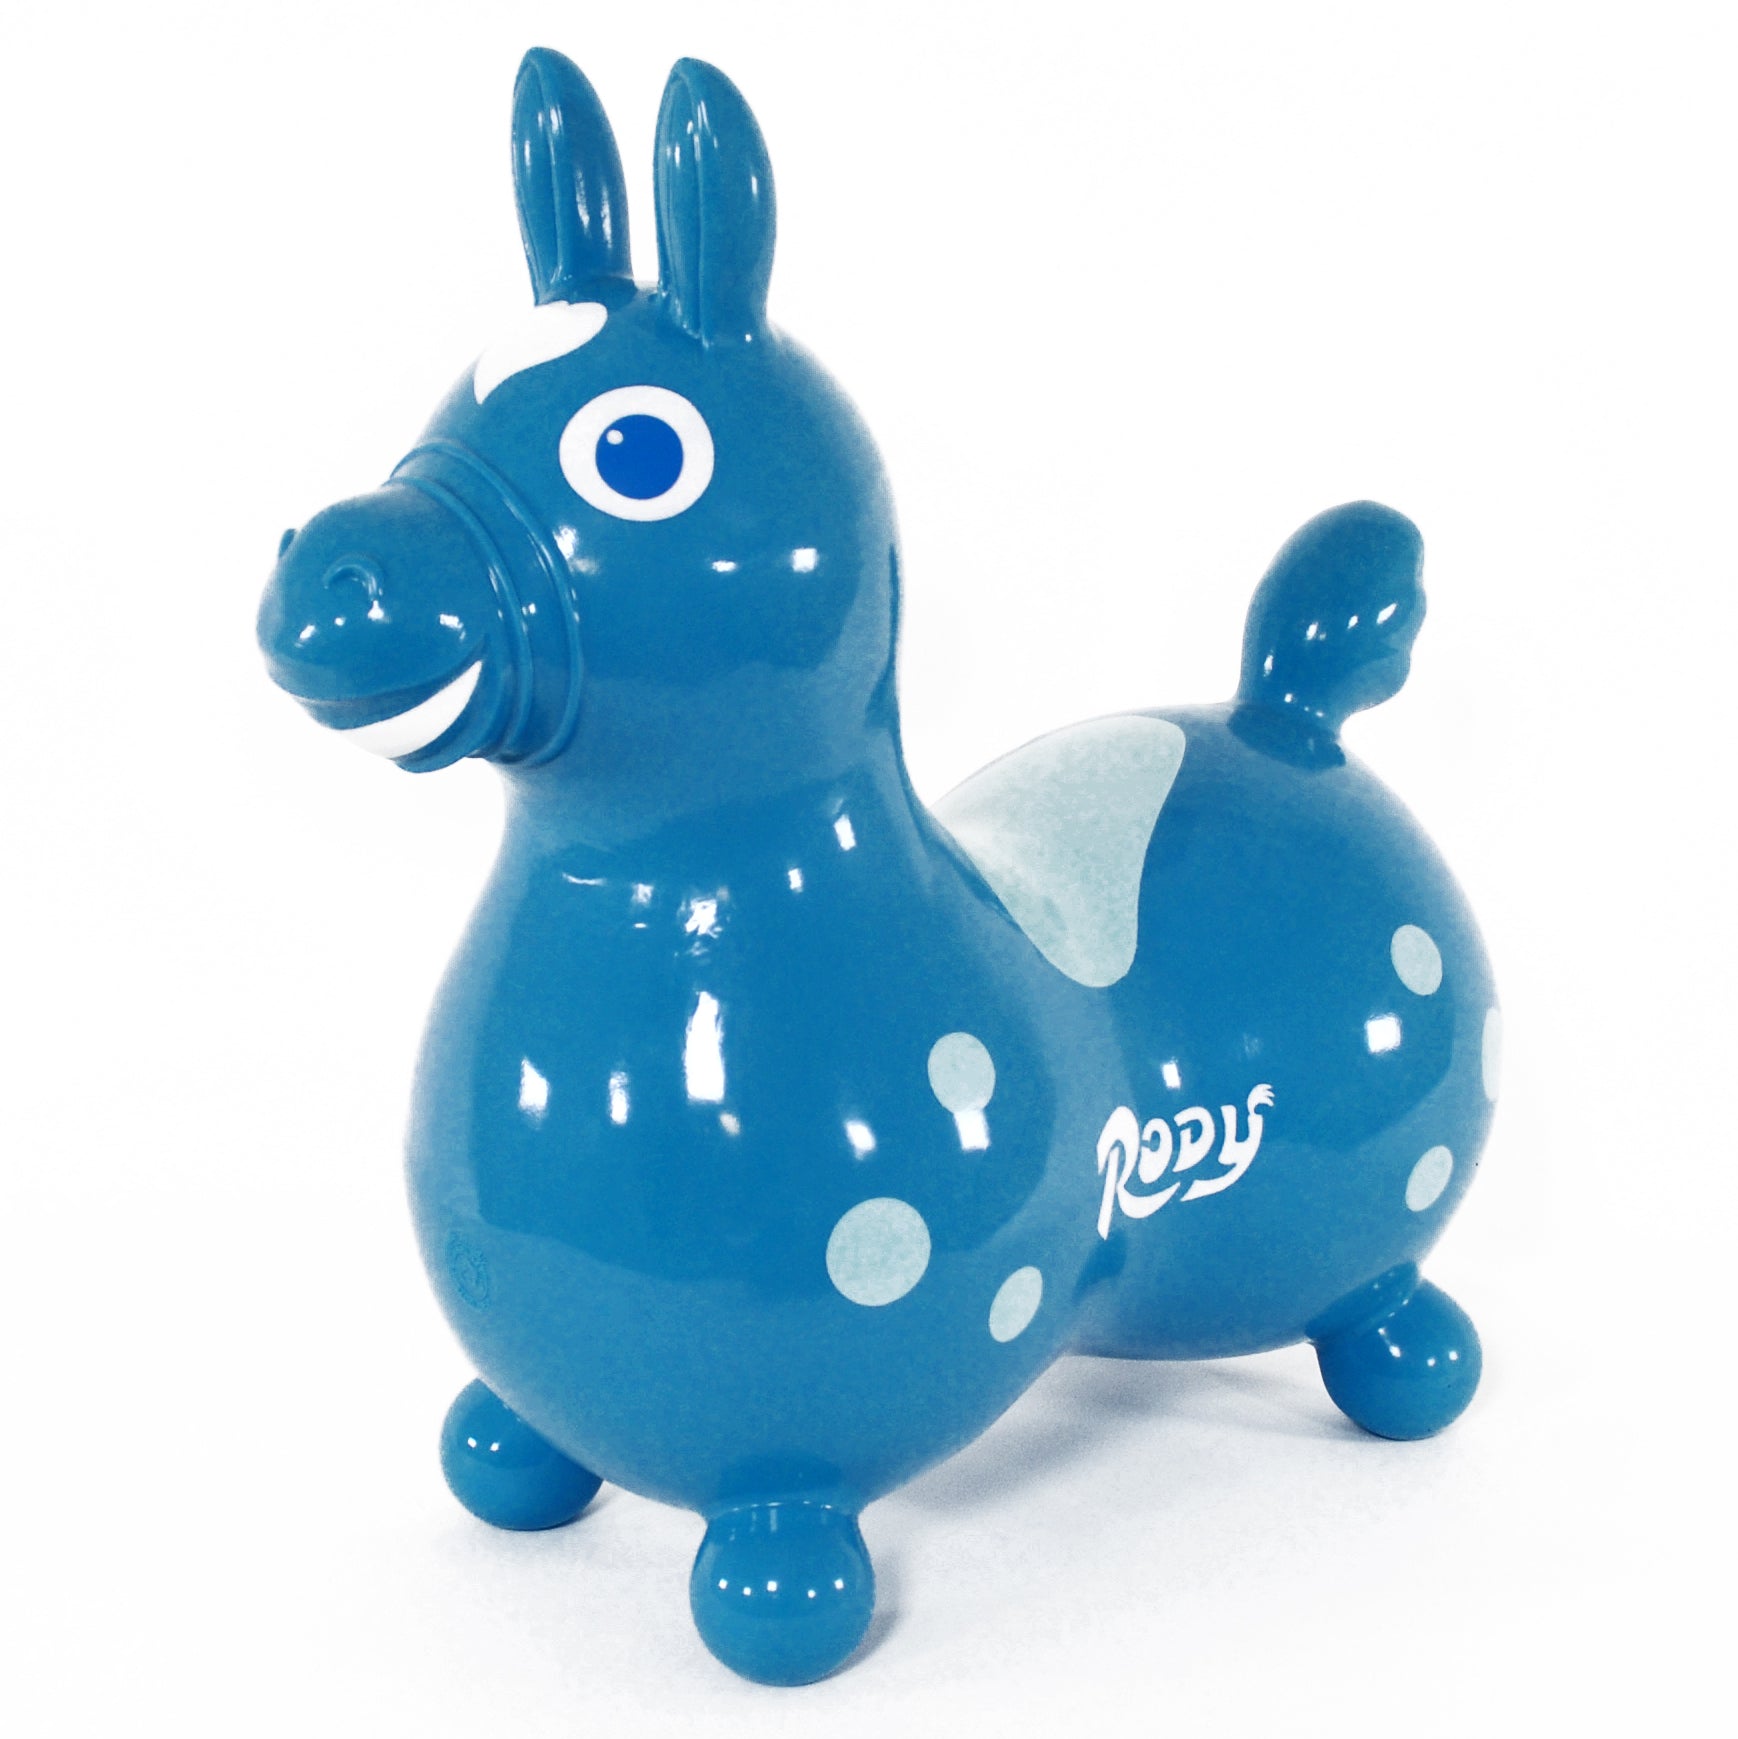 Rody Inflatable Bounce Horse- Teal with Pump by KETTLER International Inc # 7006